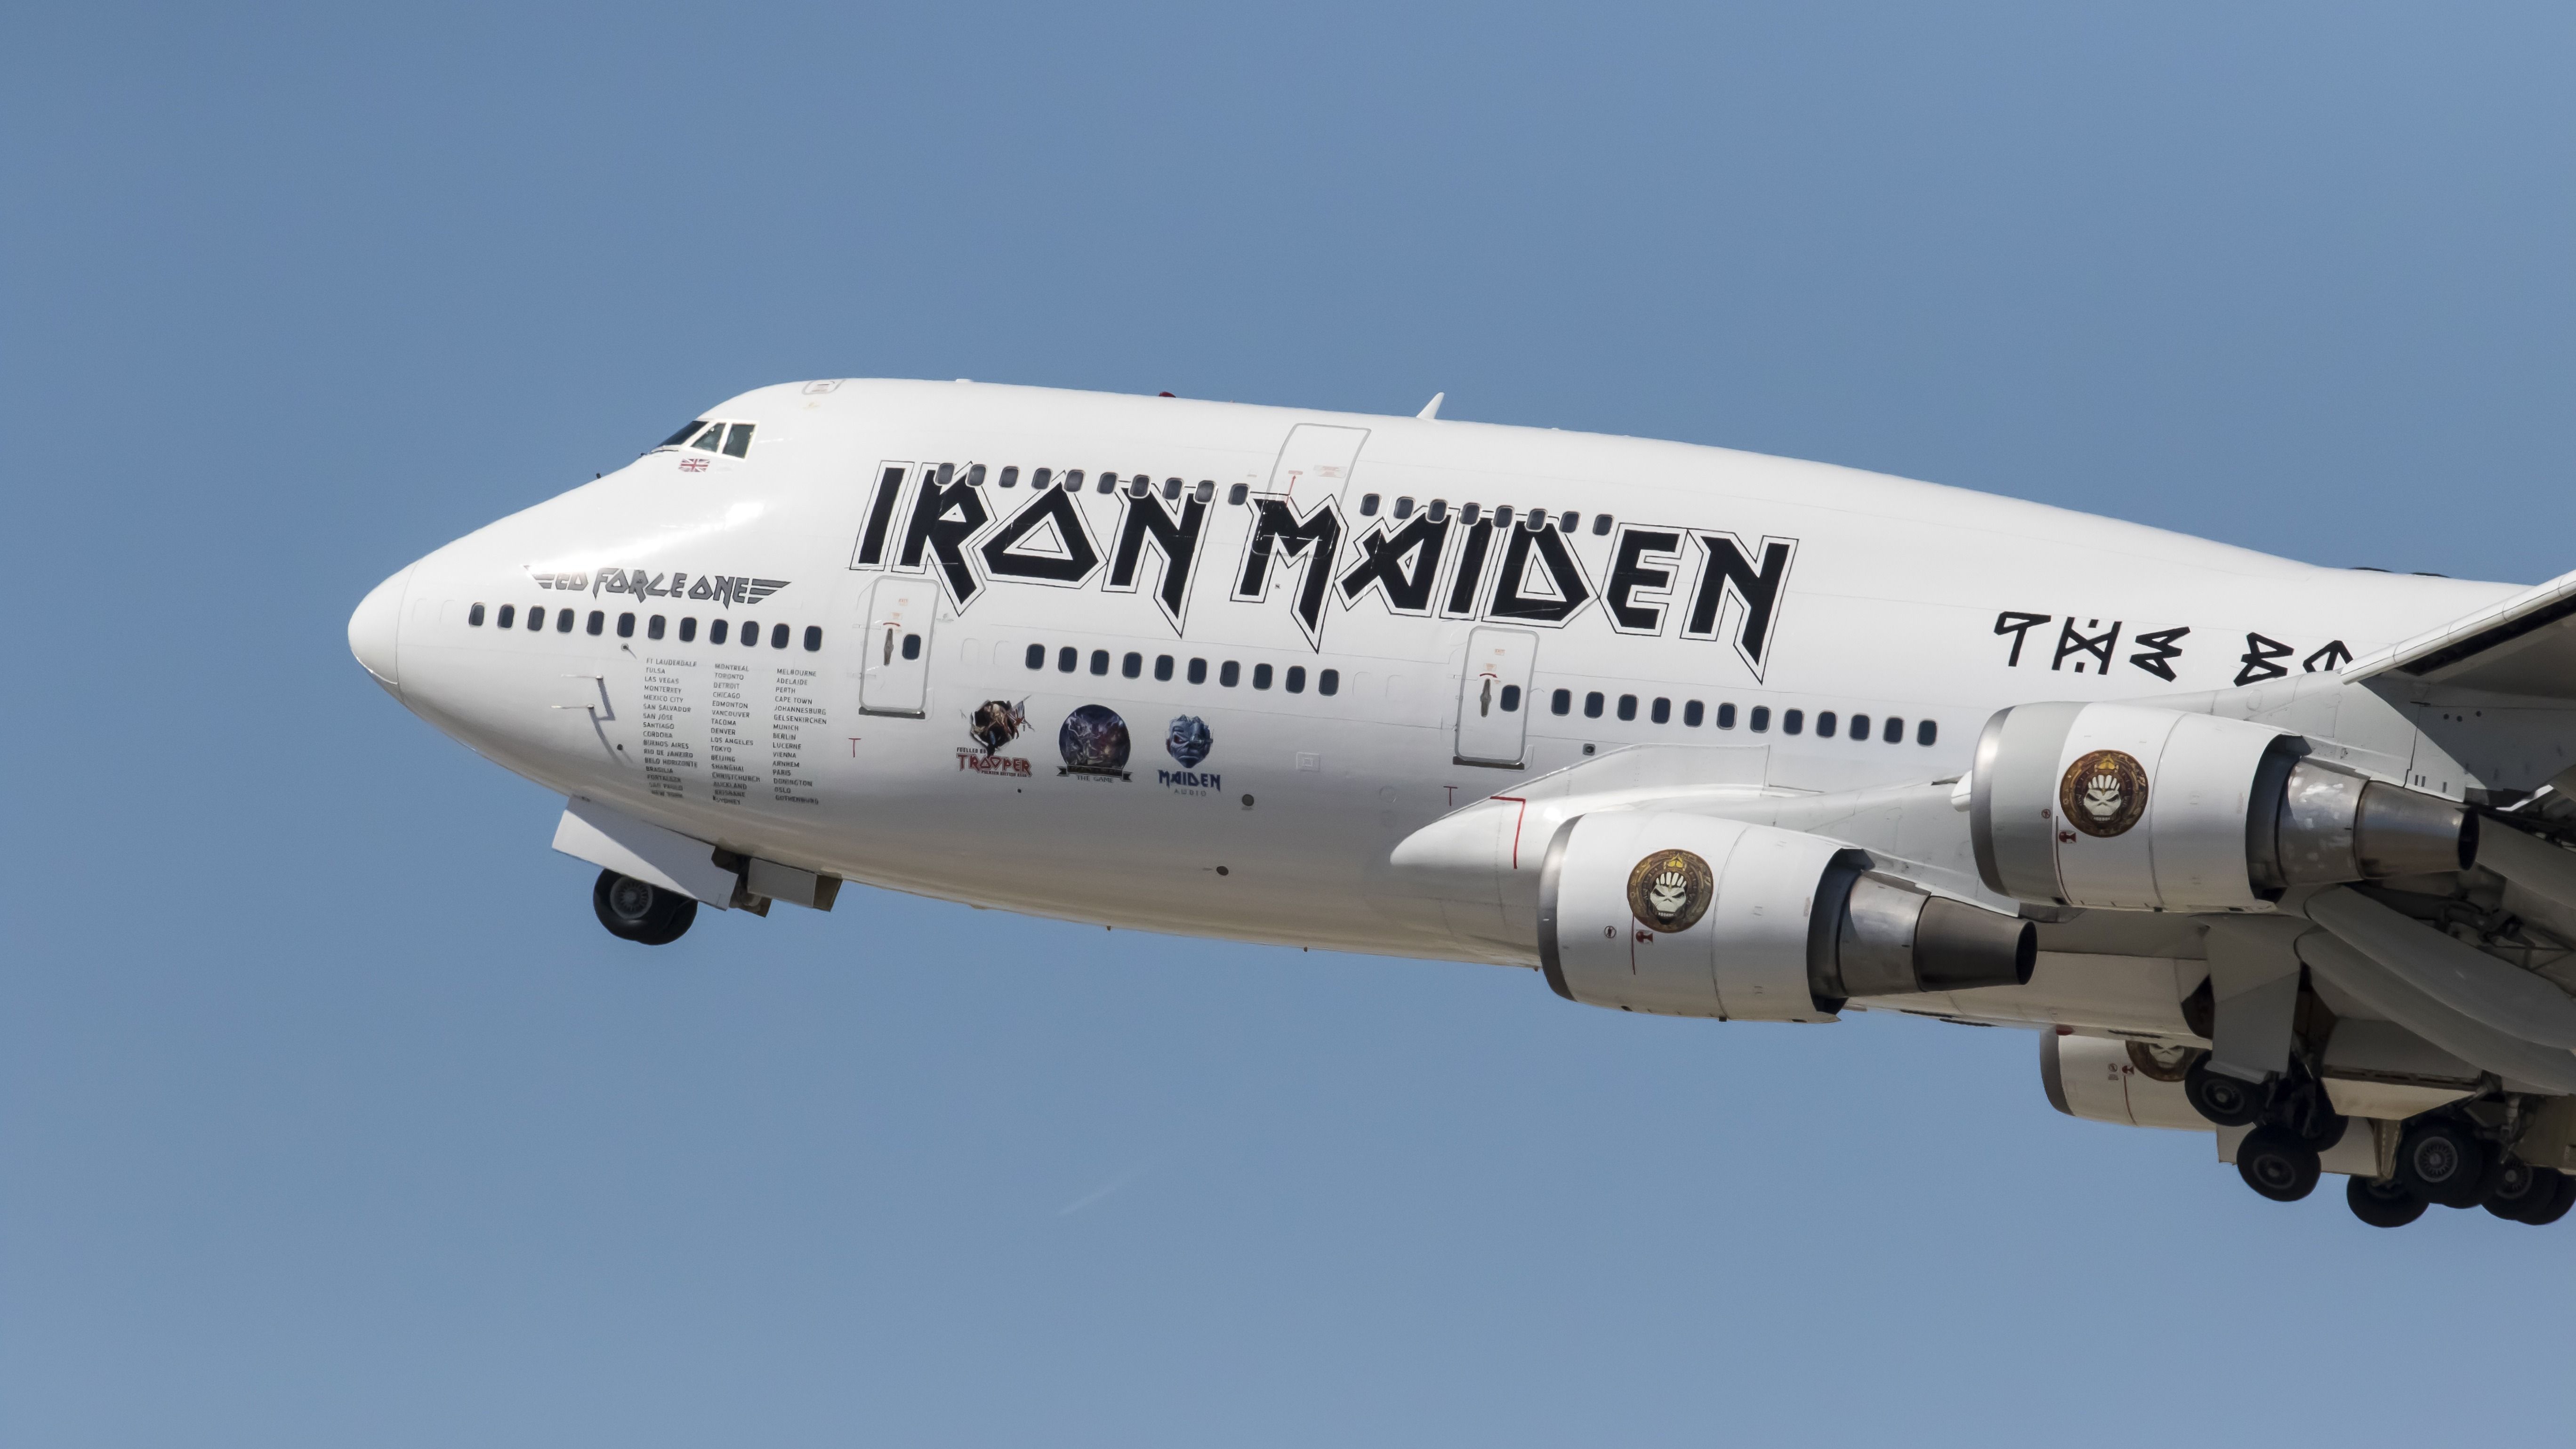 The Iron Maiden Boeing 747 Flying in the sky.